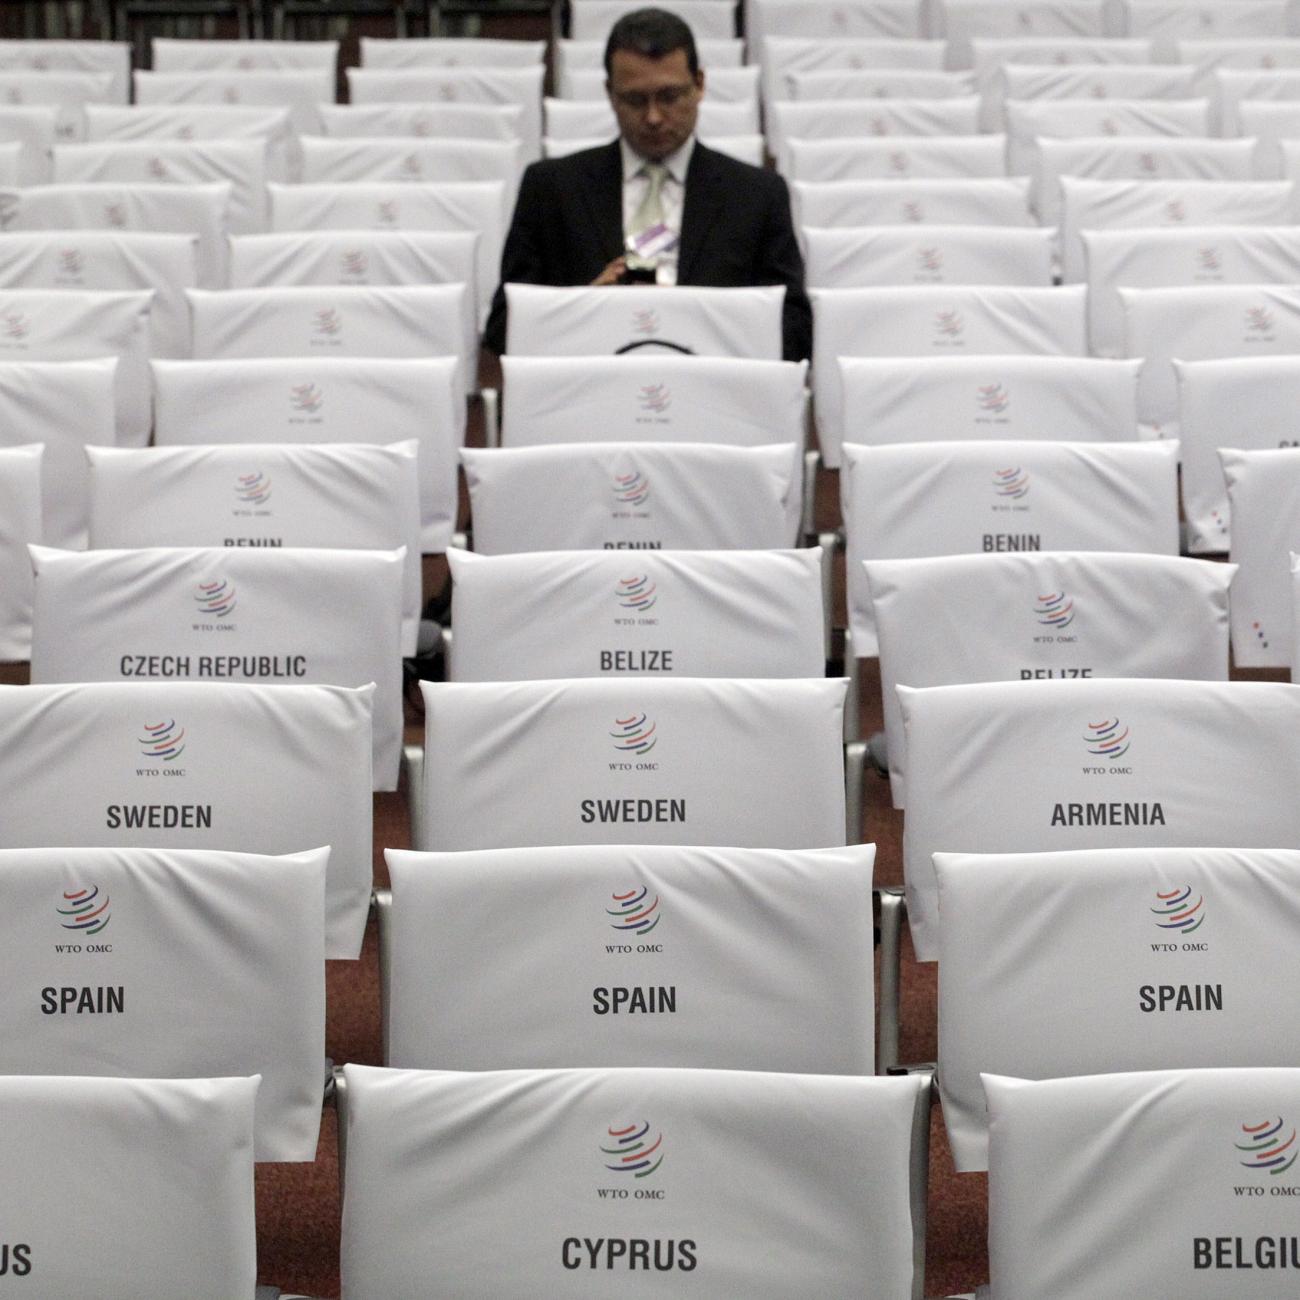 Names of countries taking part to the 8th World Trade Organization Ministerial Conference are pictured taped onto rows of chairs for delegates, in Geneva, Switzerland, on December 15, 2011.